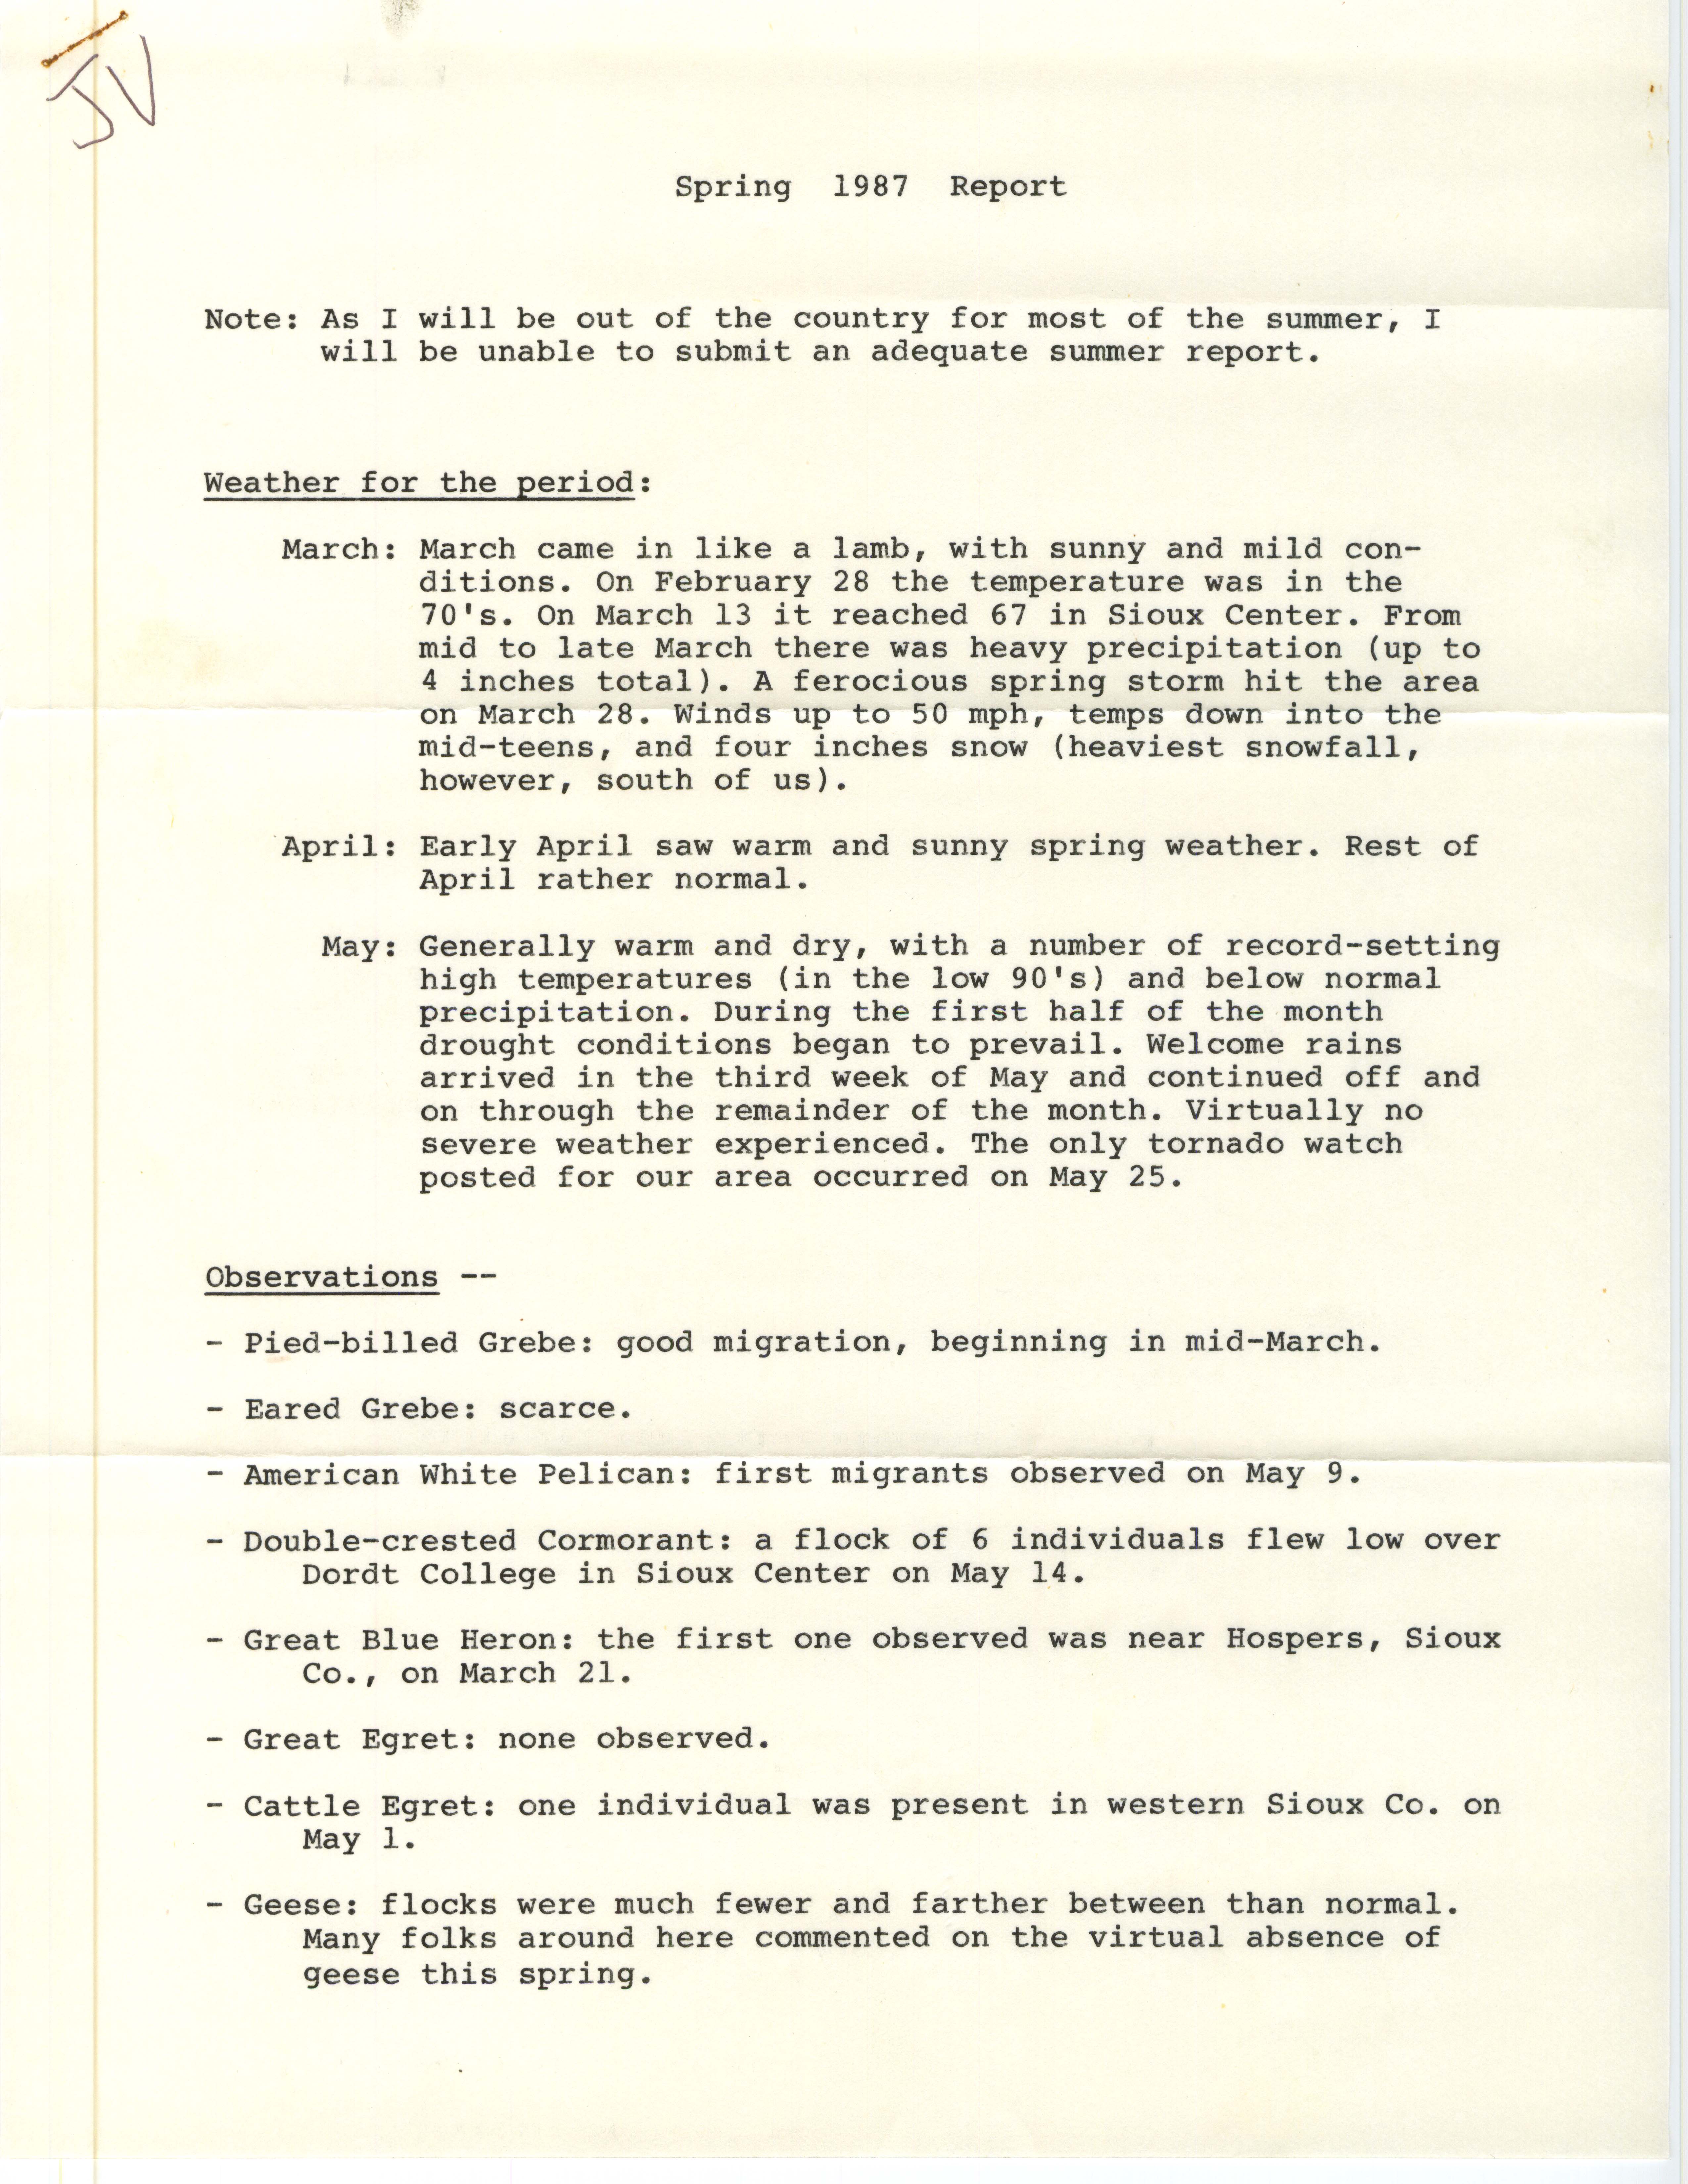 Field notes contributed by John Van Dyk, June 1, 1987